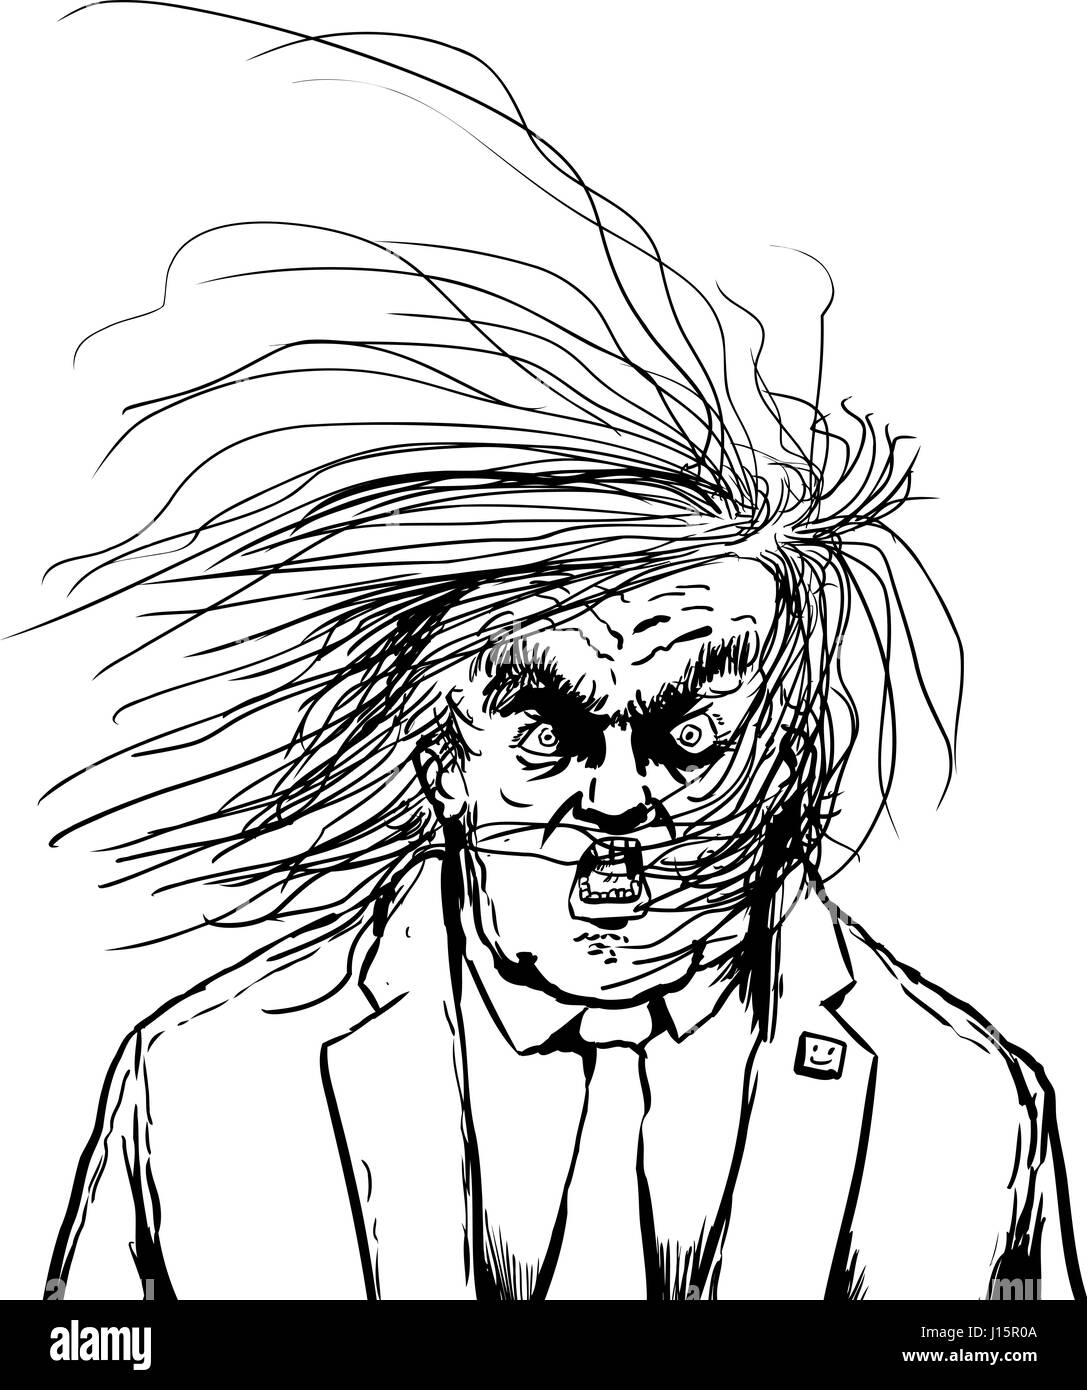 April 18, 2017. Outlined cartoon of a furious Donald Trump with hair blowing in his face Stock Photo